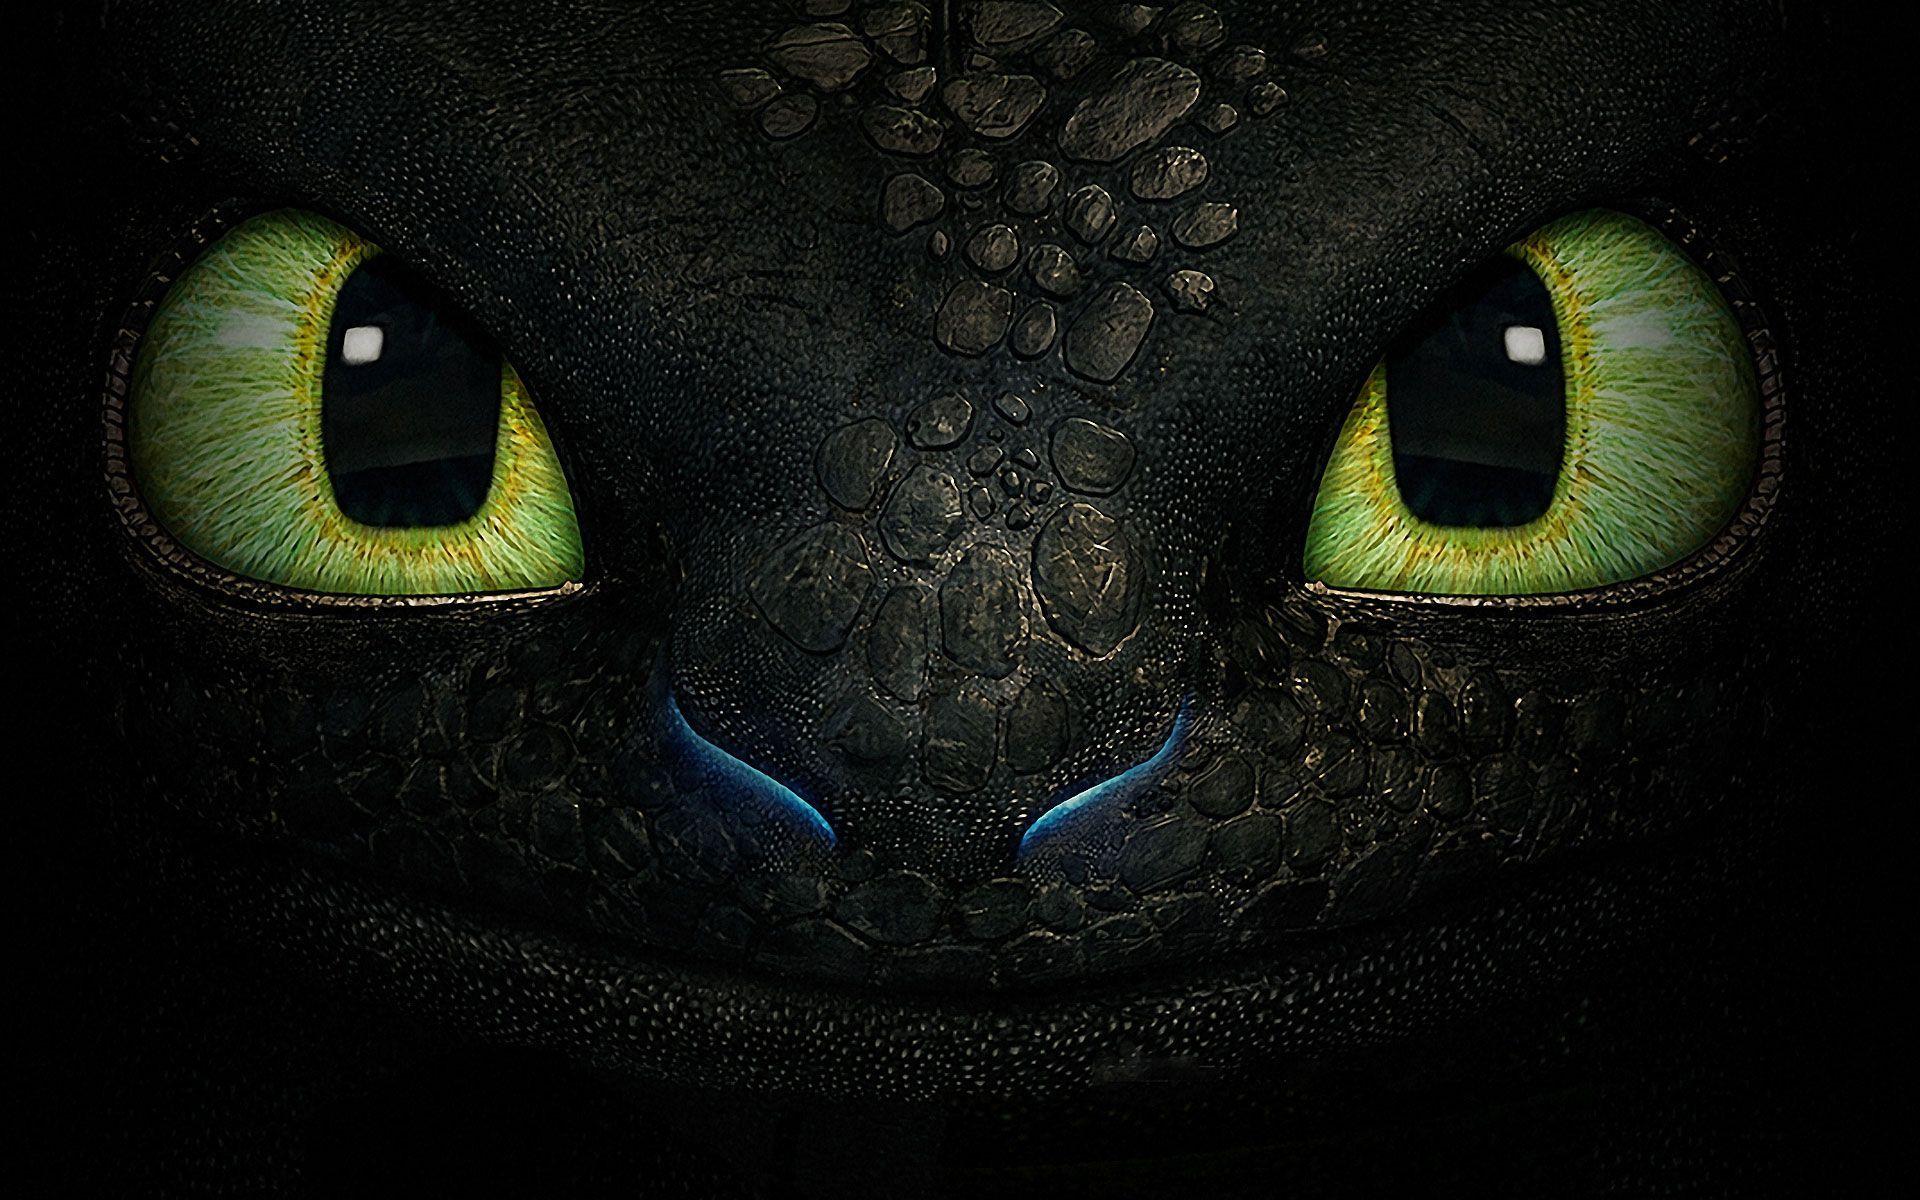 How to Train Your Dragon 2 Wallpaper HD Collection. Dragon face